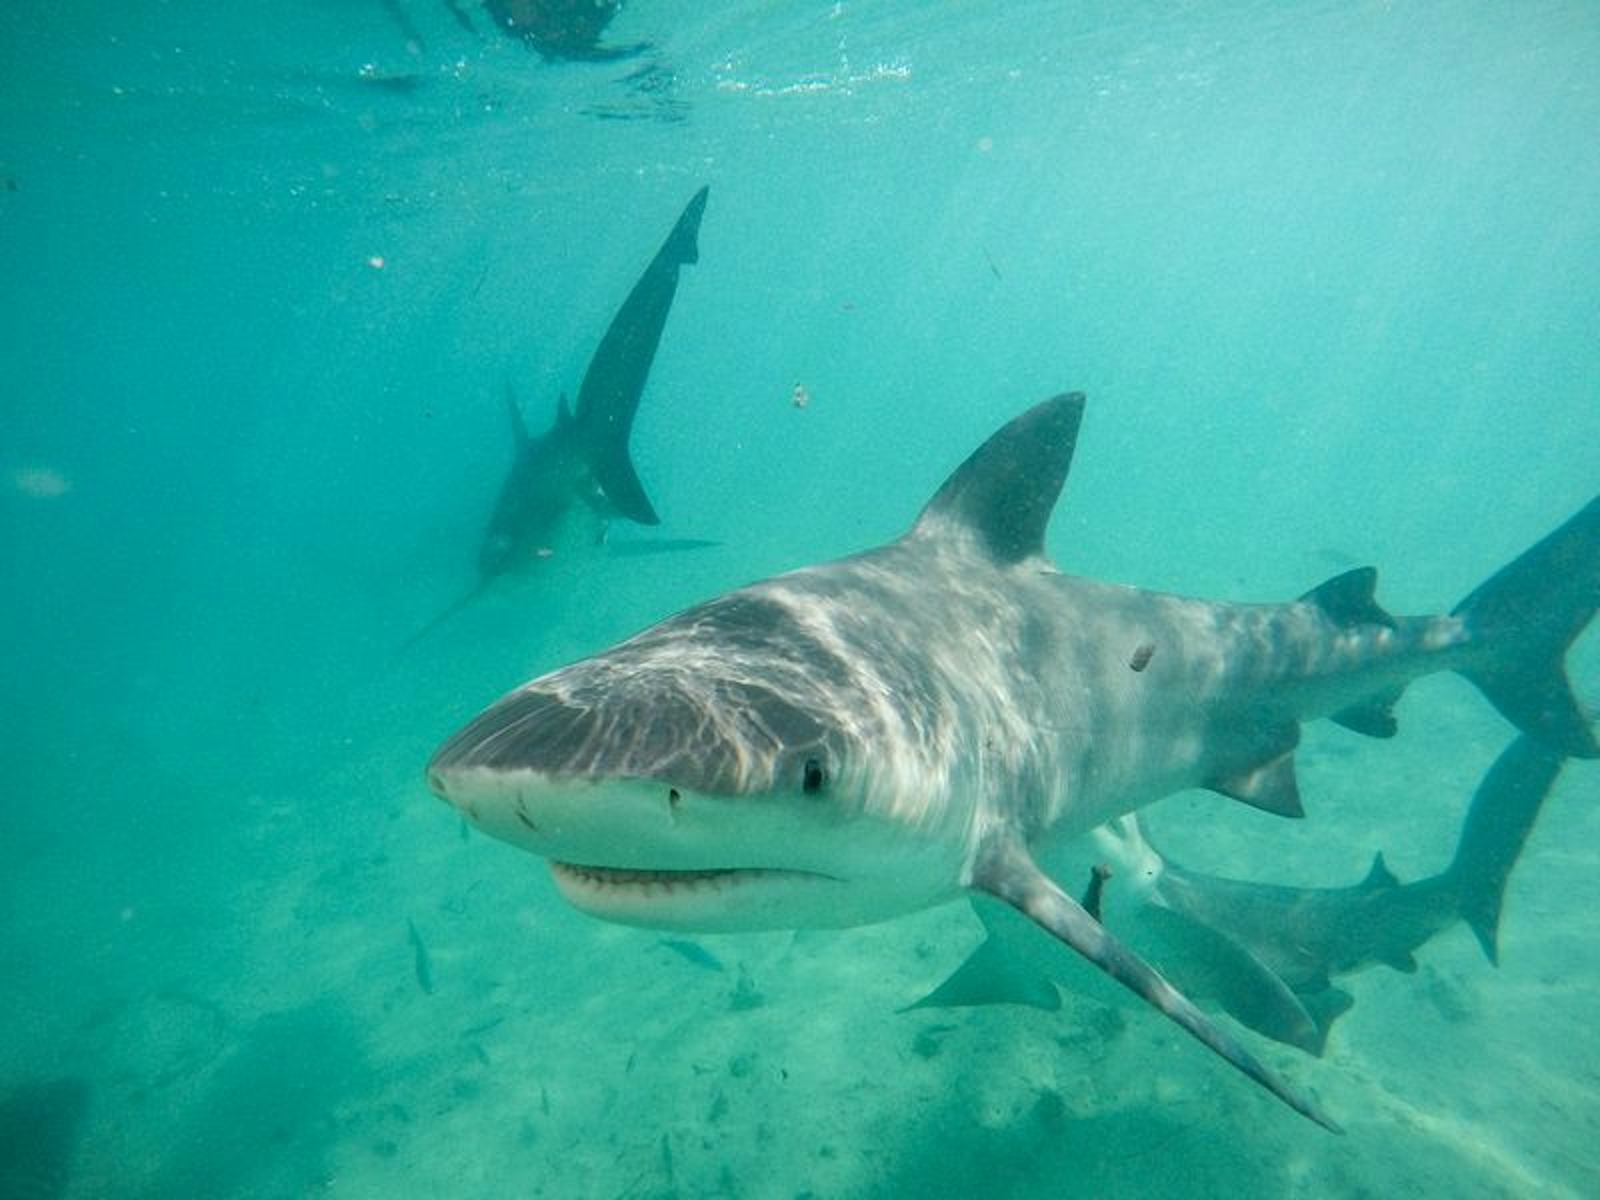 How To Stream Shark Week 2016 Online So All The Aquatic Action Can Be Yours